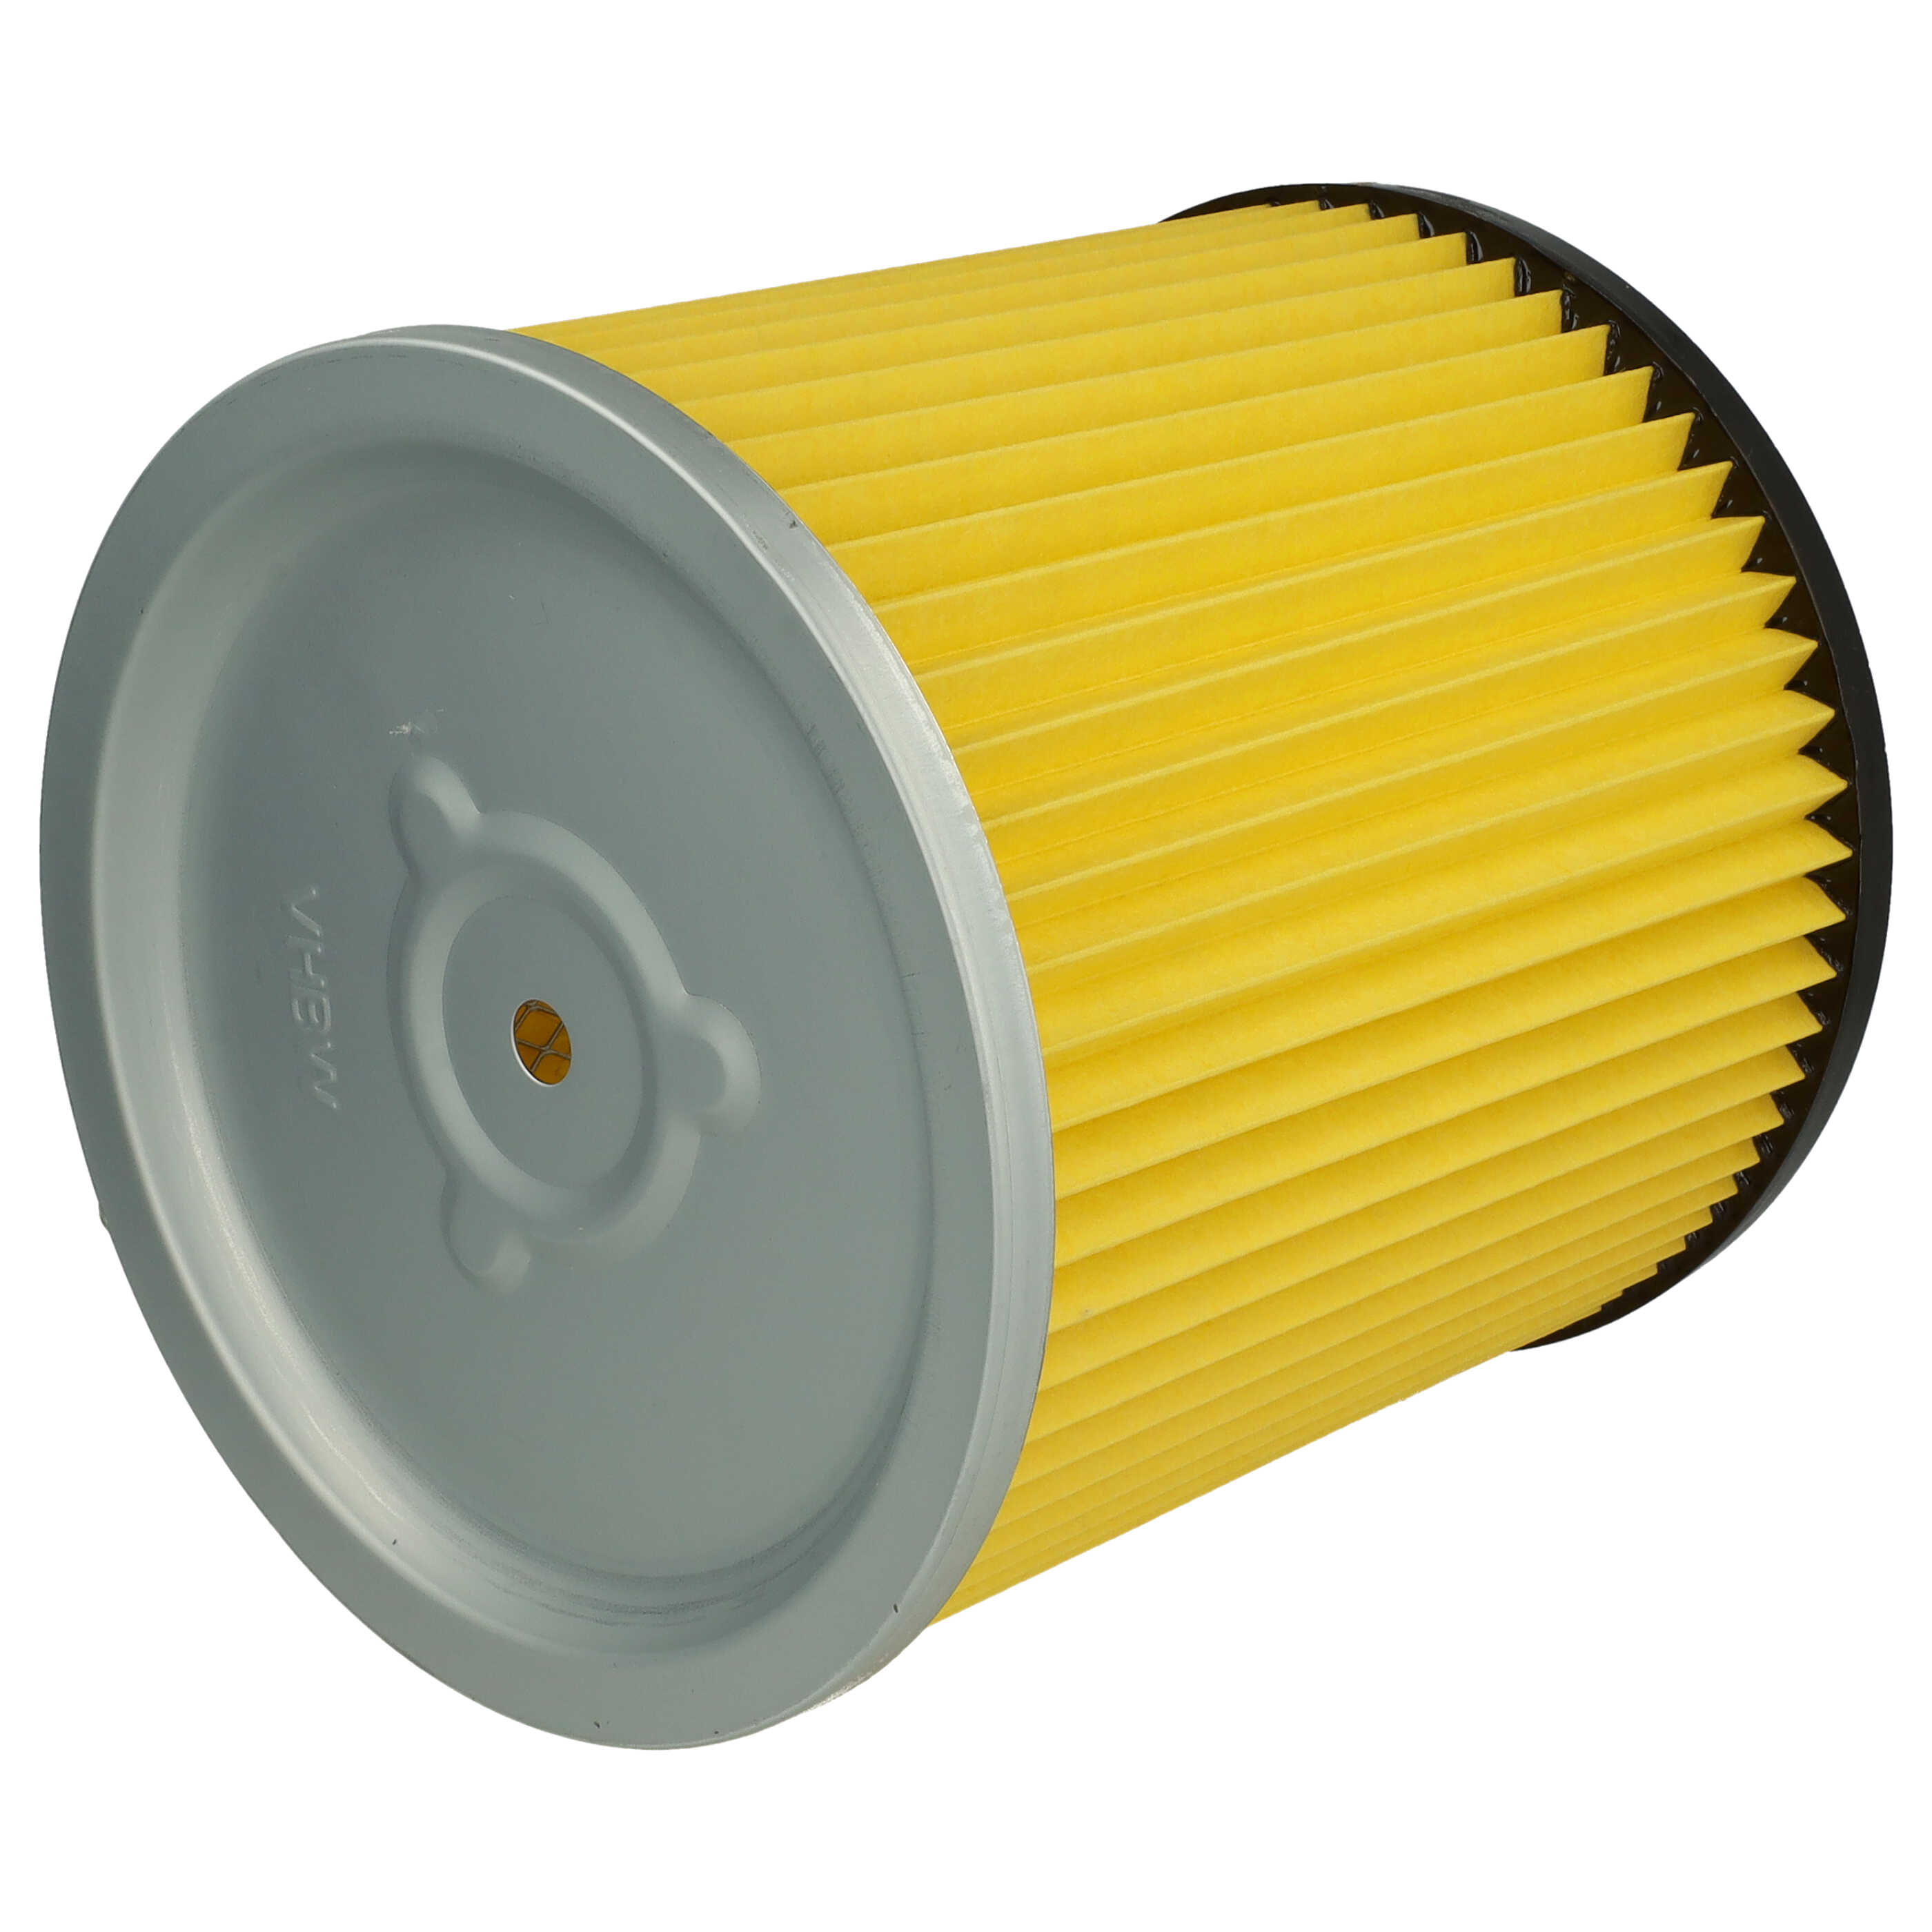 1x cartridge filter replaces Kärcher 6.414-354.0, 6.414-335.0 for DewaltVacuum Cleaner, yellow